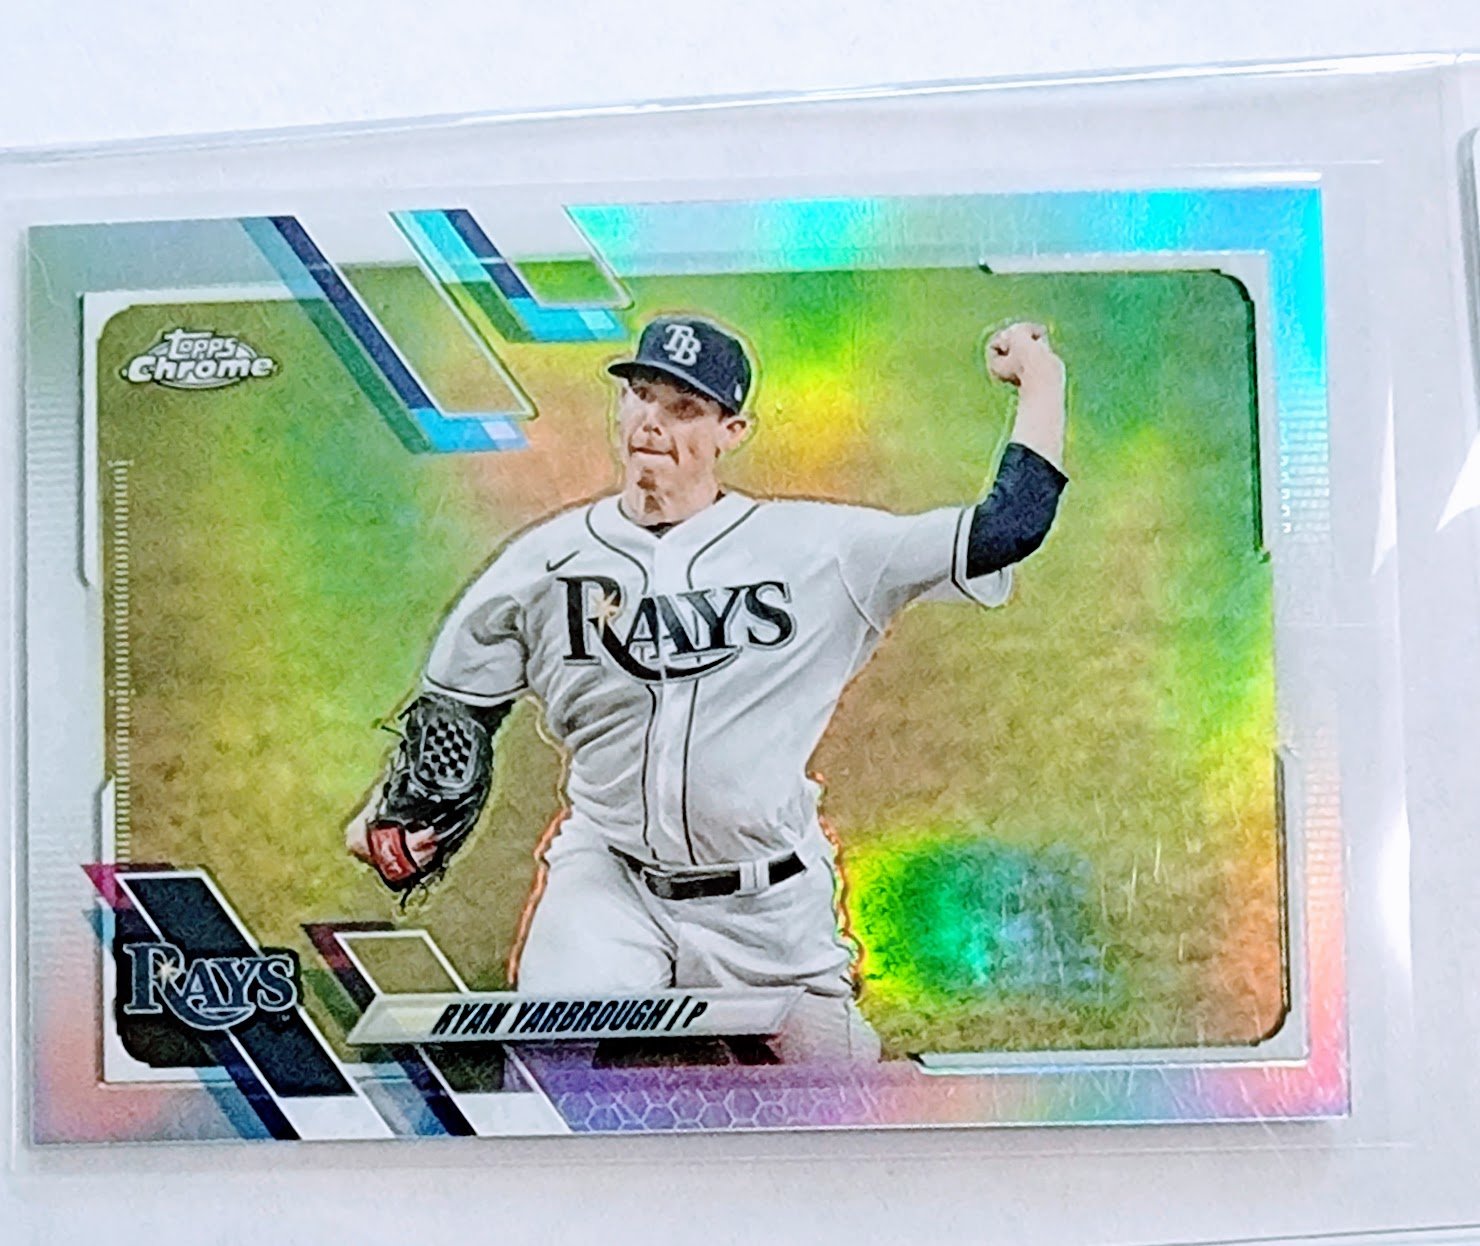 2021 Topps Chrome Ryan Yarbrough Refractor Baseball Trading Card TPTV simple Xclusive Collectibles   